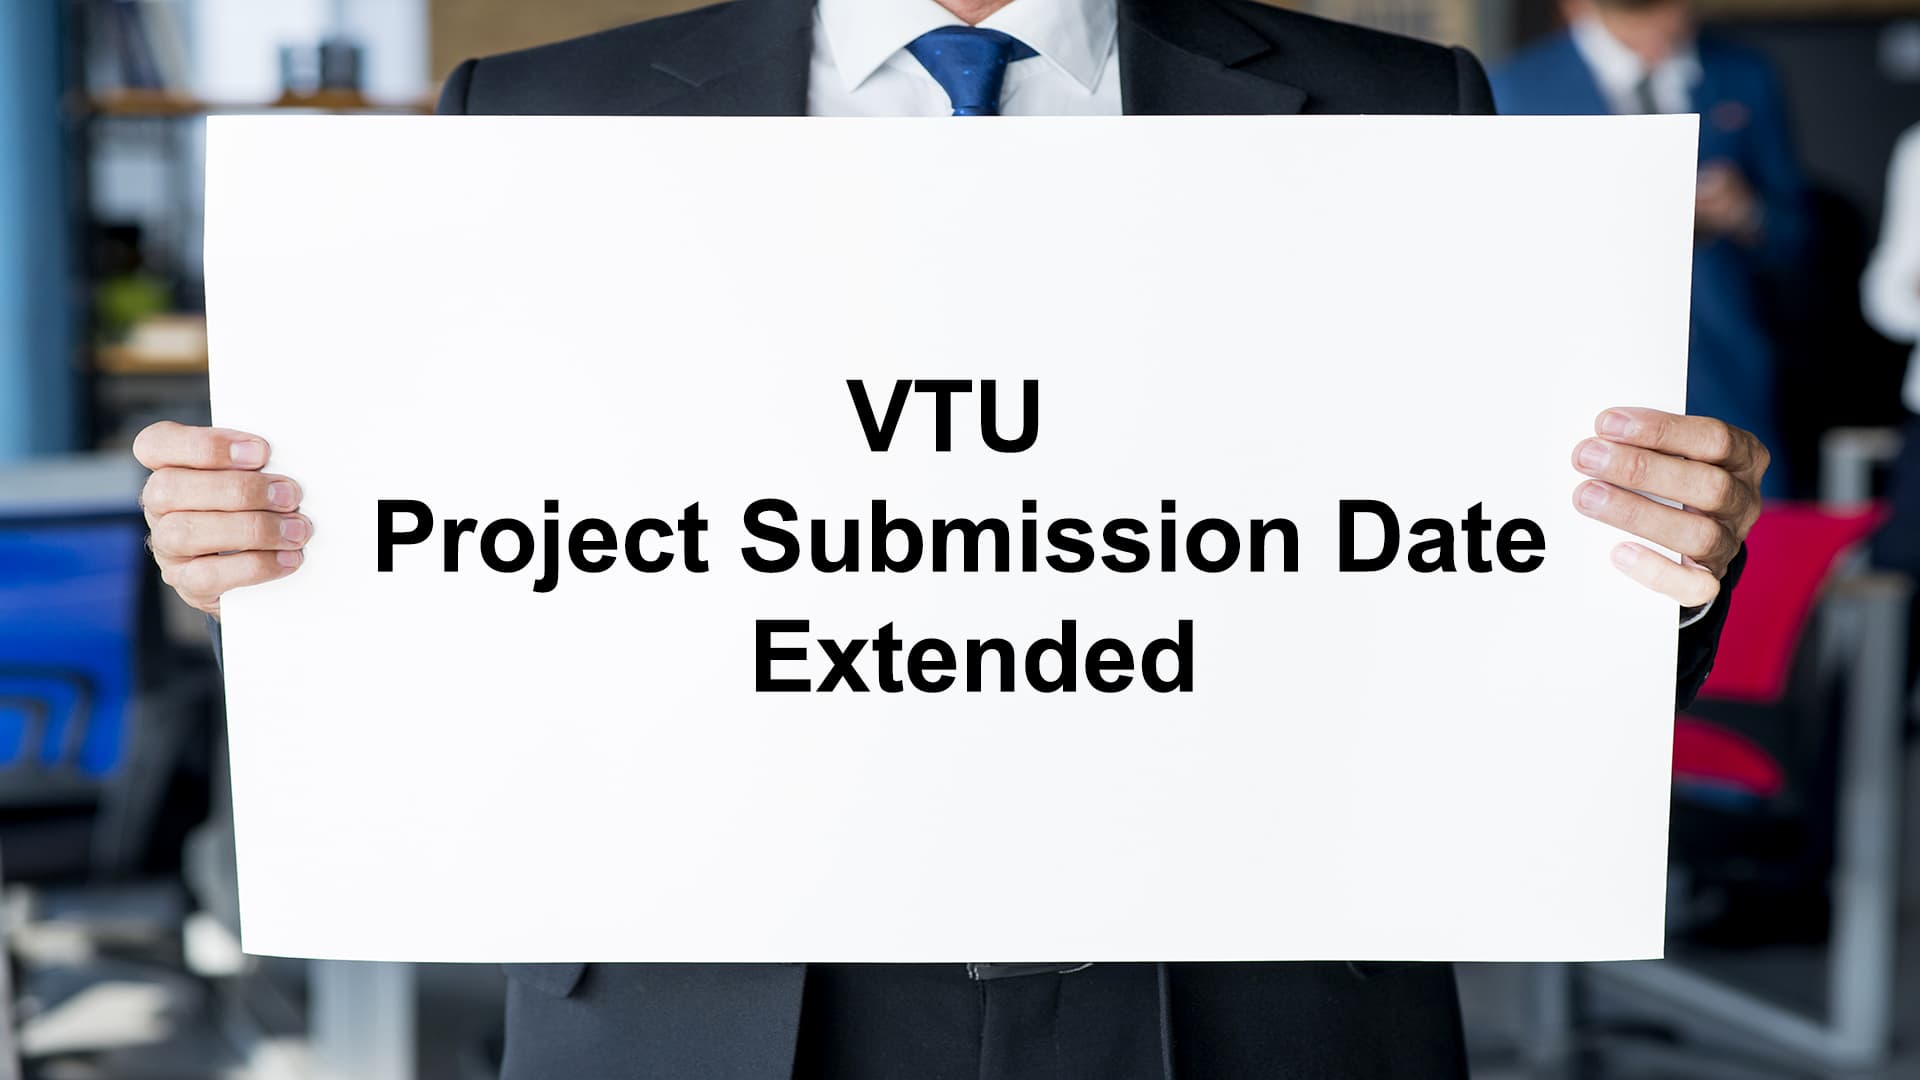 VTU Project Submission Date Extended